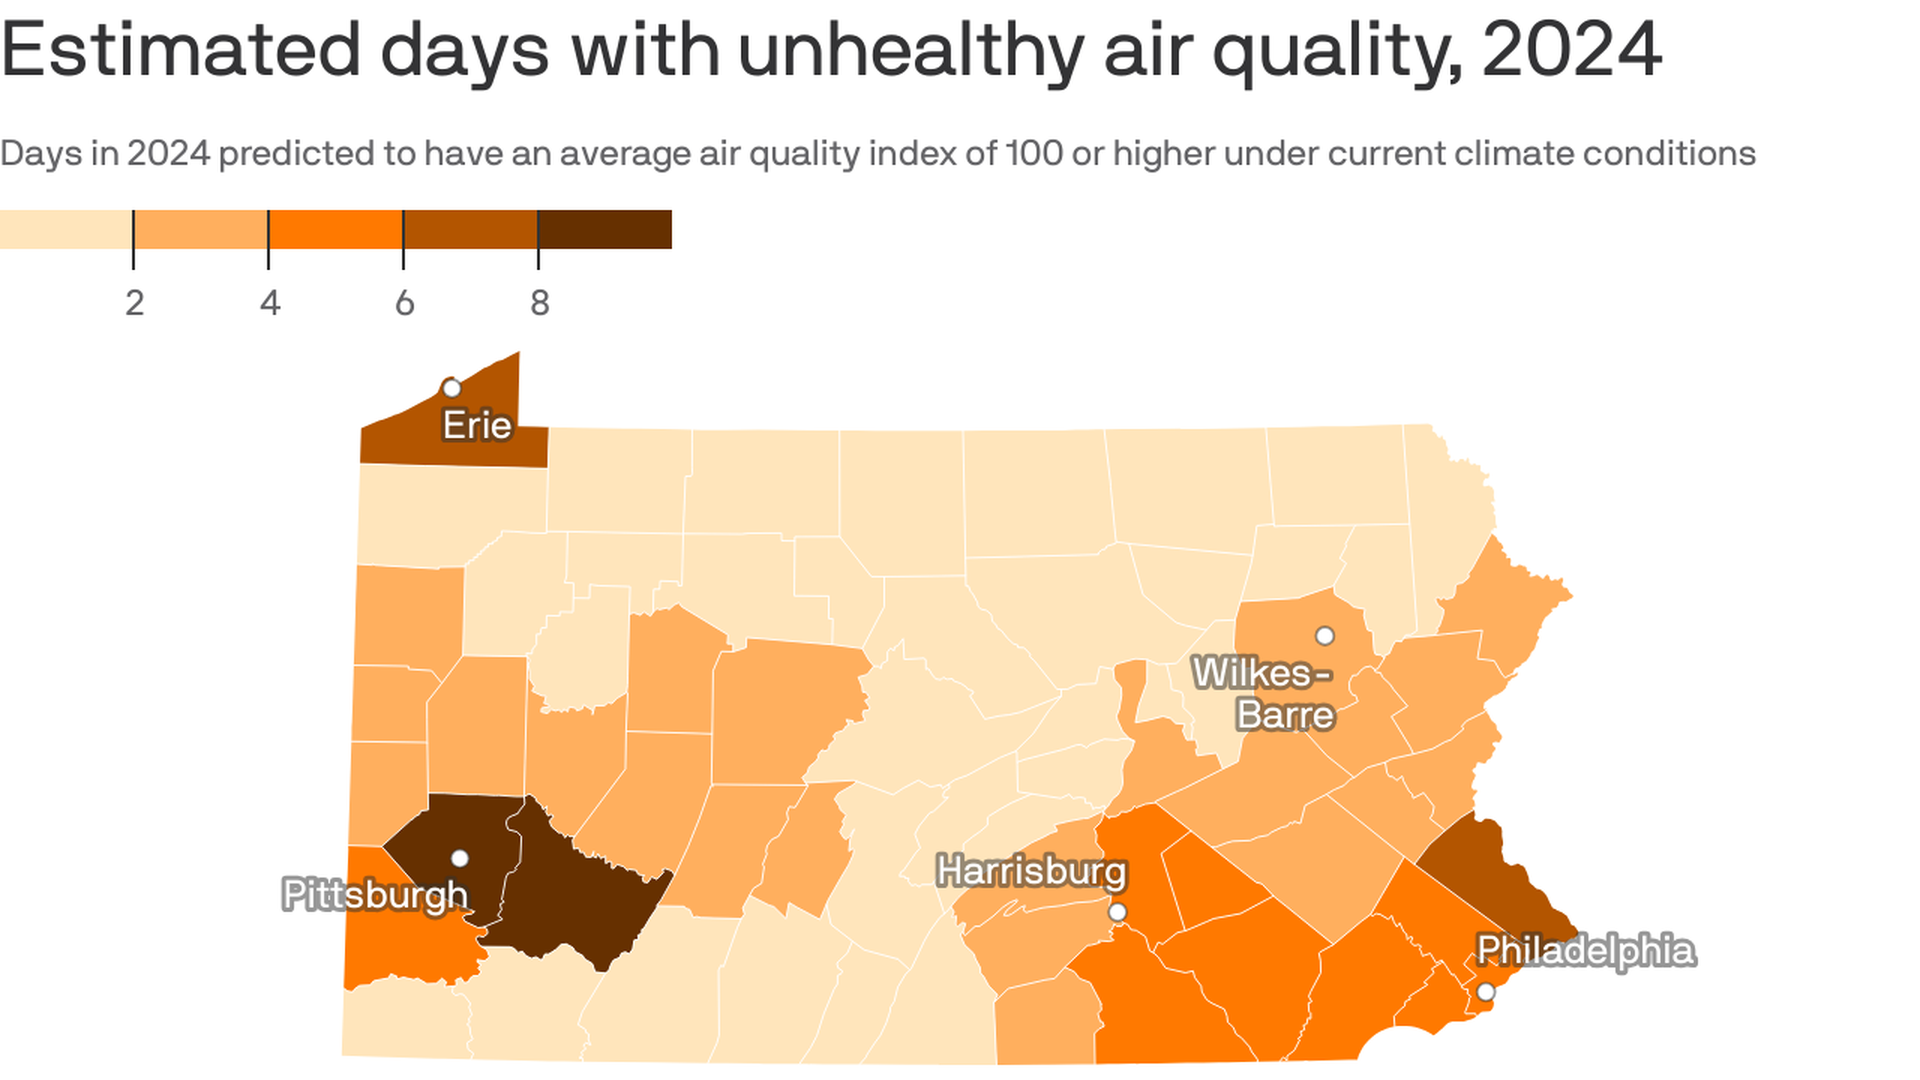 Estimated days with unhealthy air quality, 2024